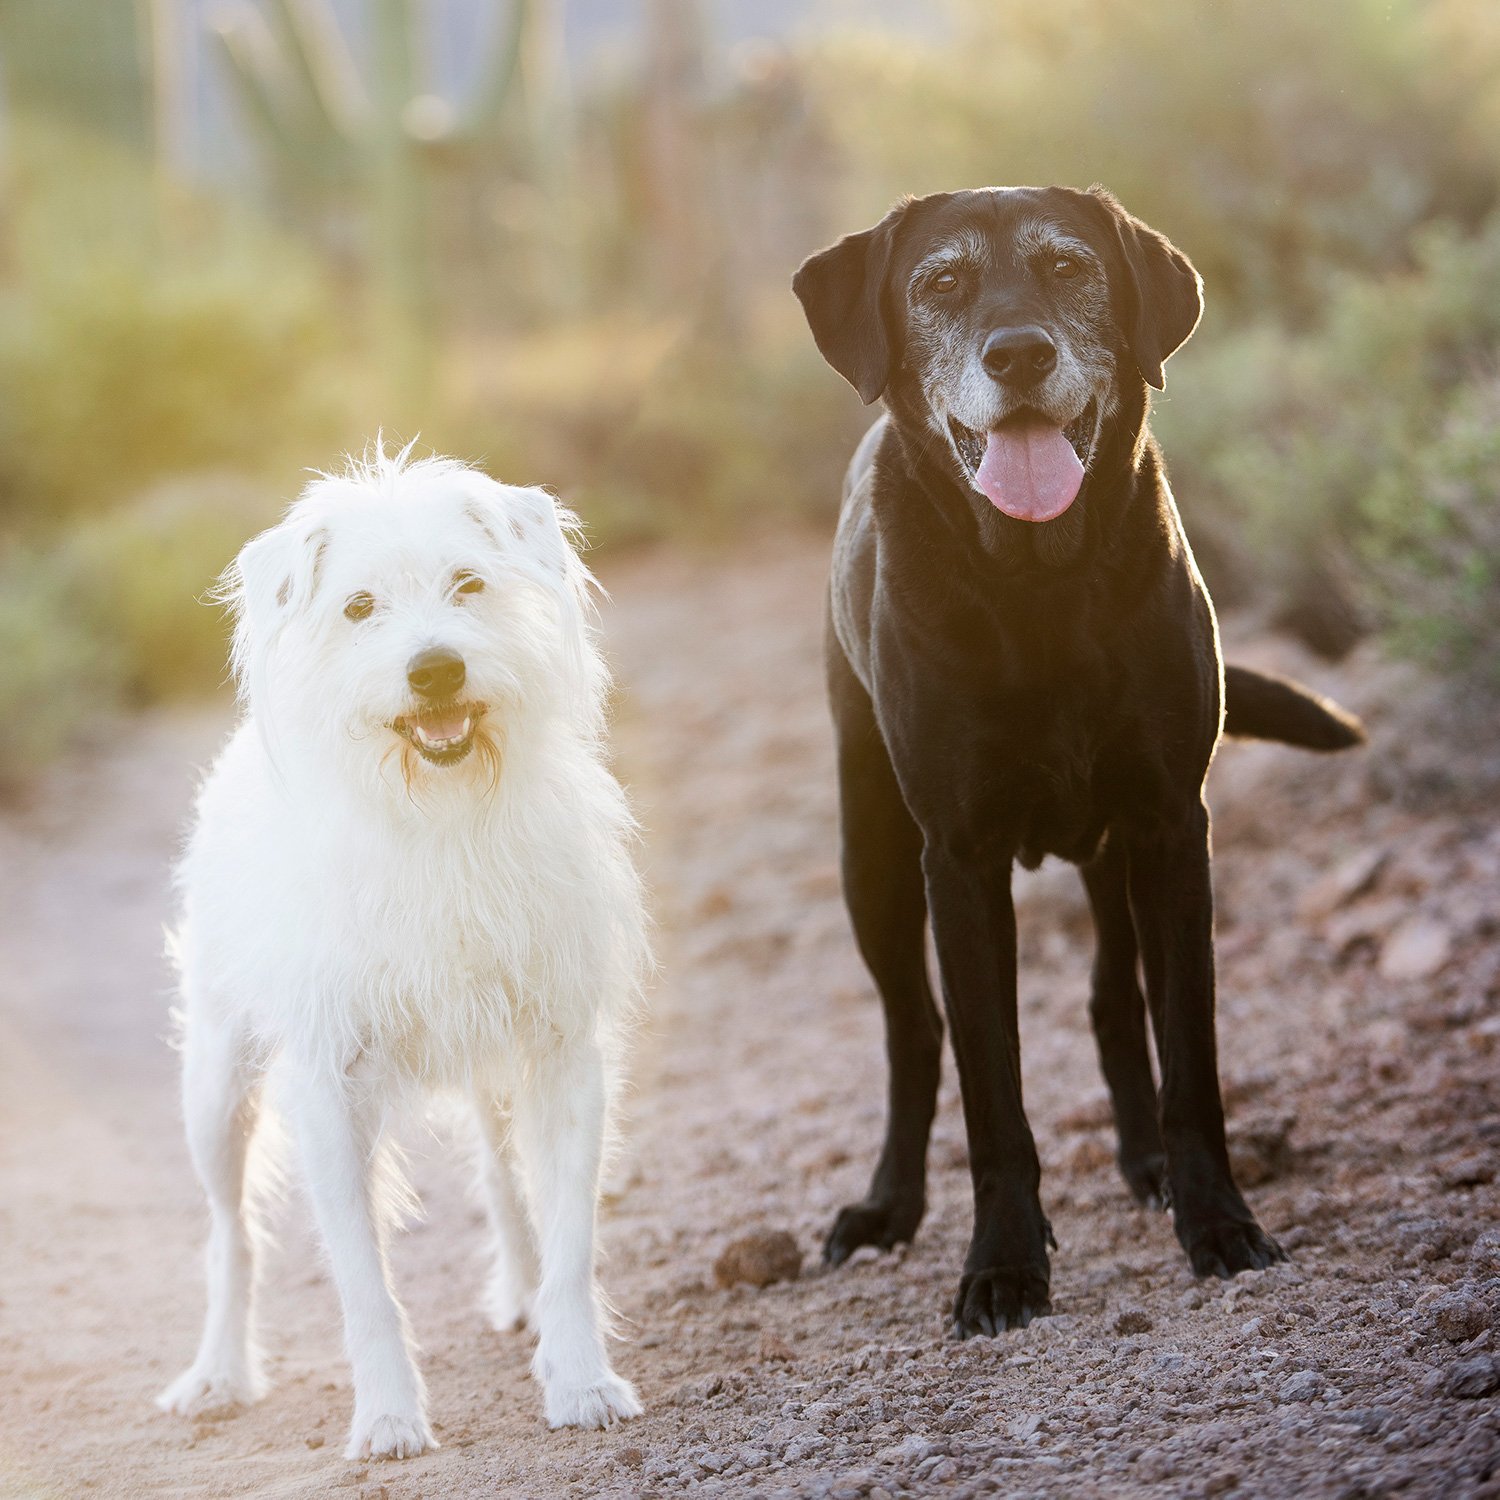 A black labrador and a white shaggy dog stand on a path outdoors. 